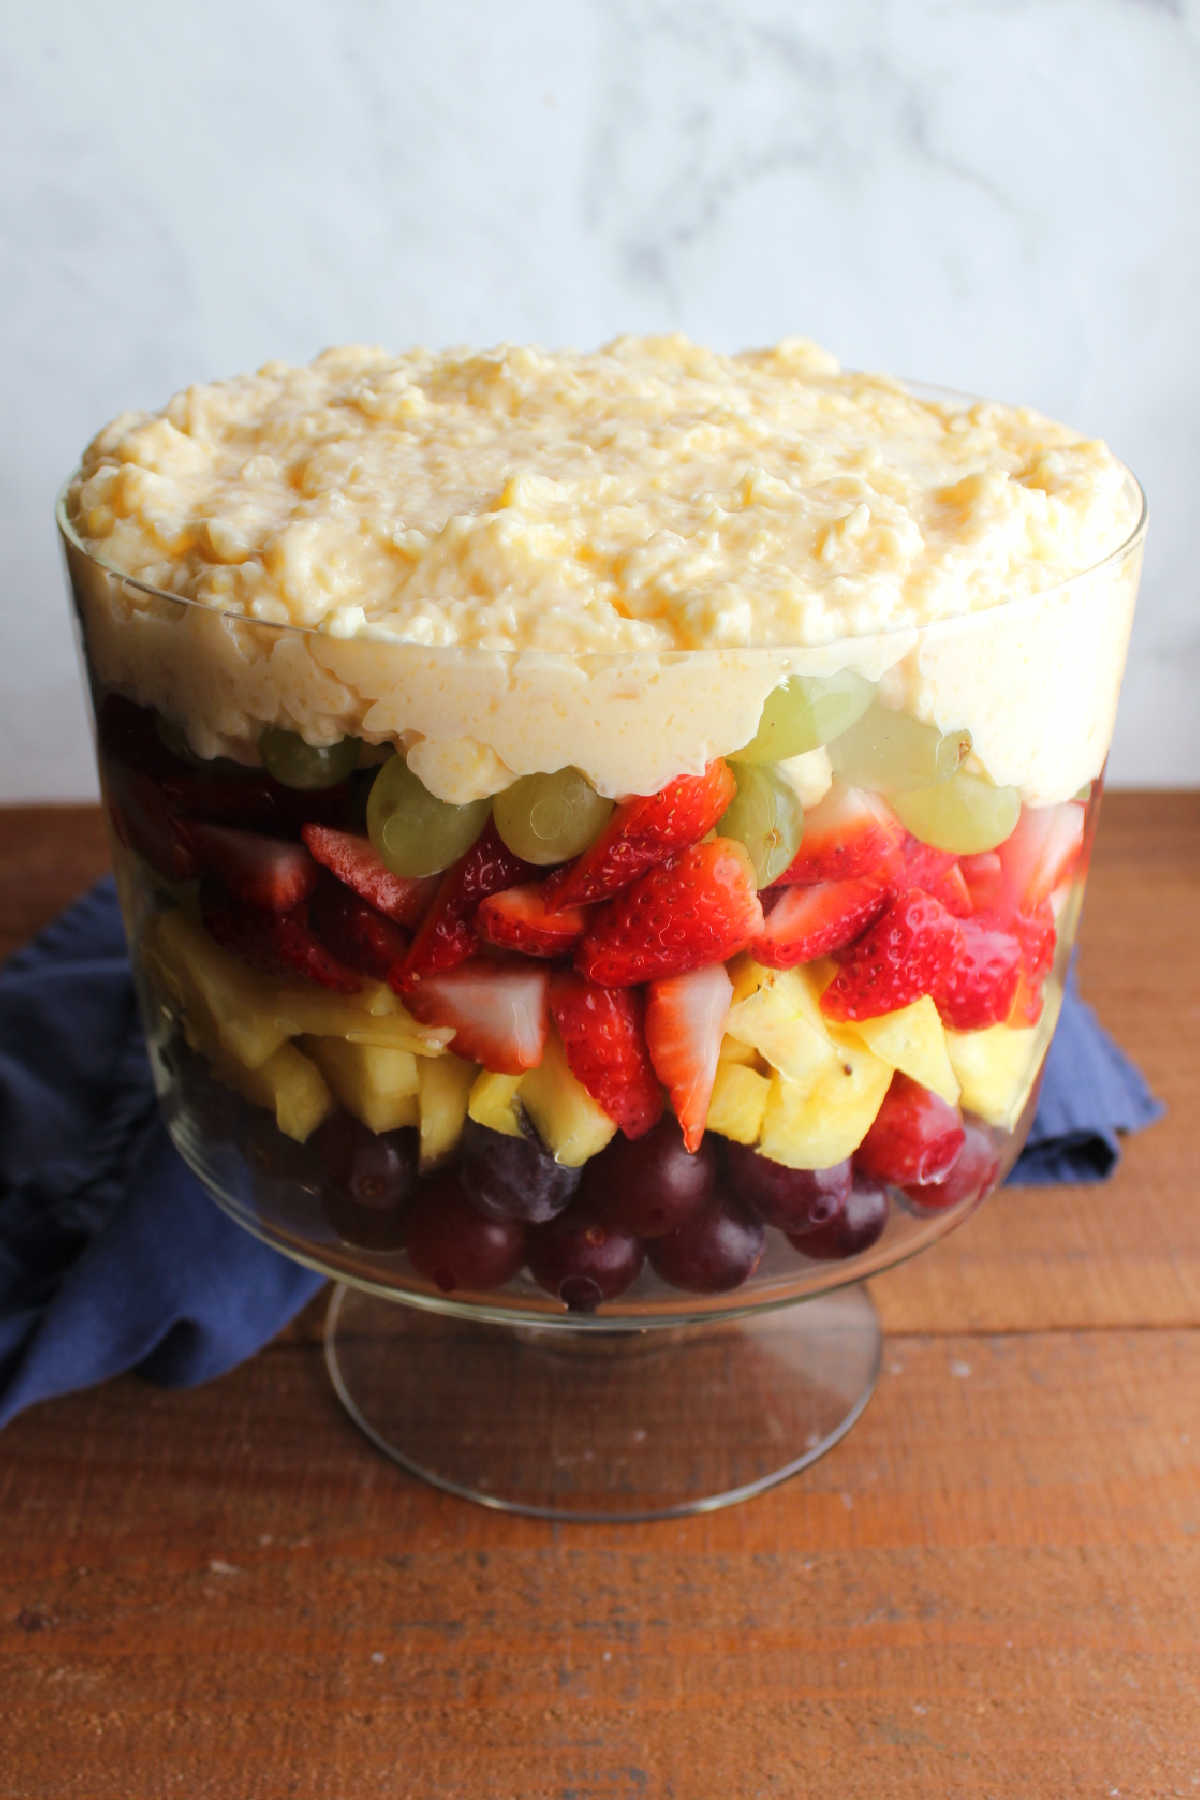 Pudding mixture layered on top of fresh fruit in trifle bowl.